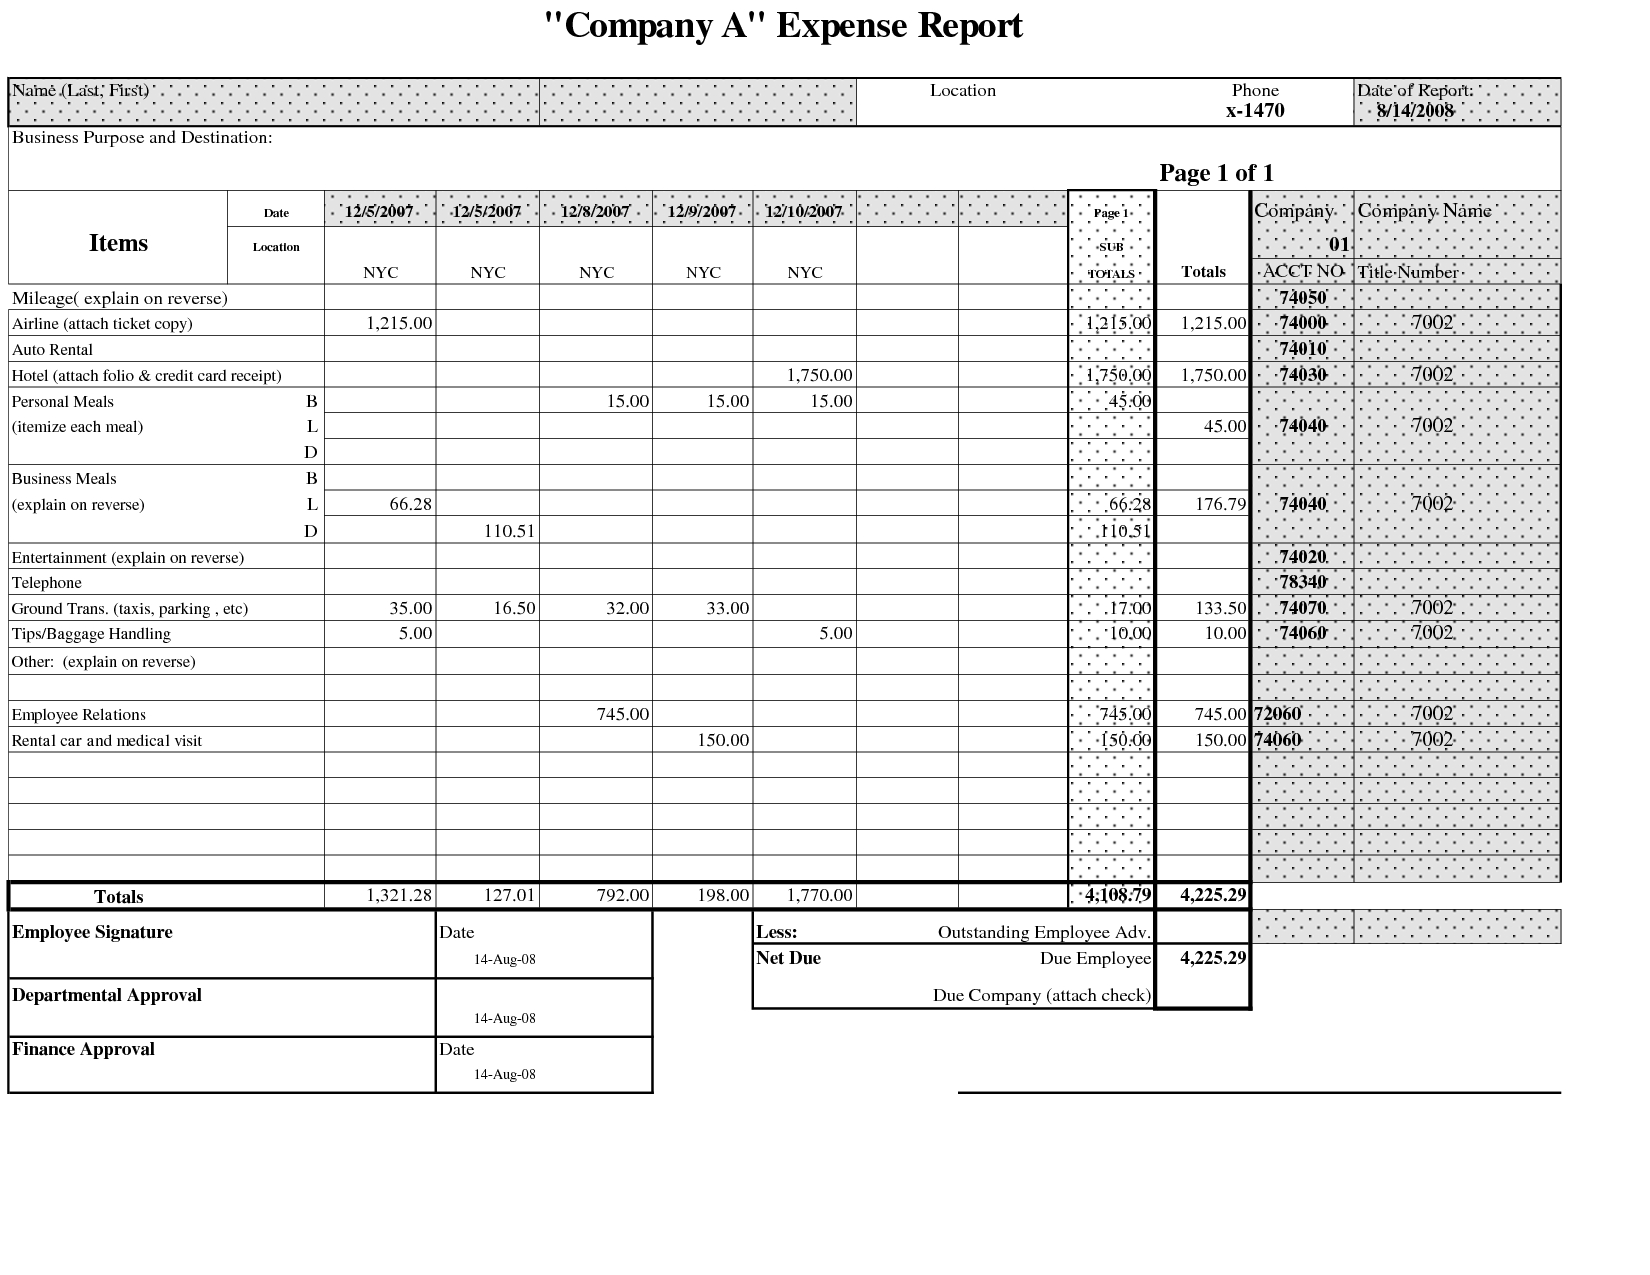 5 New Excel Report Templates | Excel Templates Regarding Company Expense Report Template